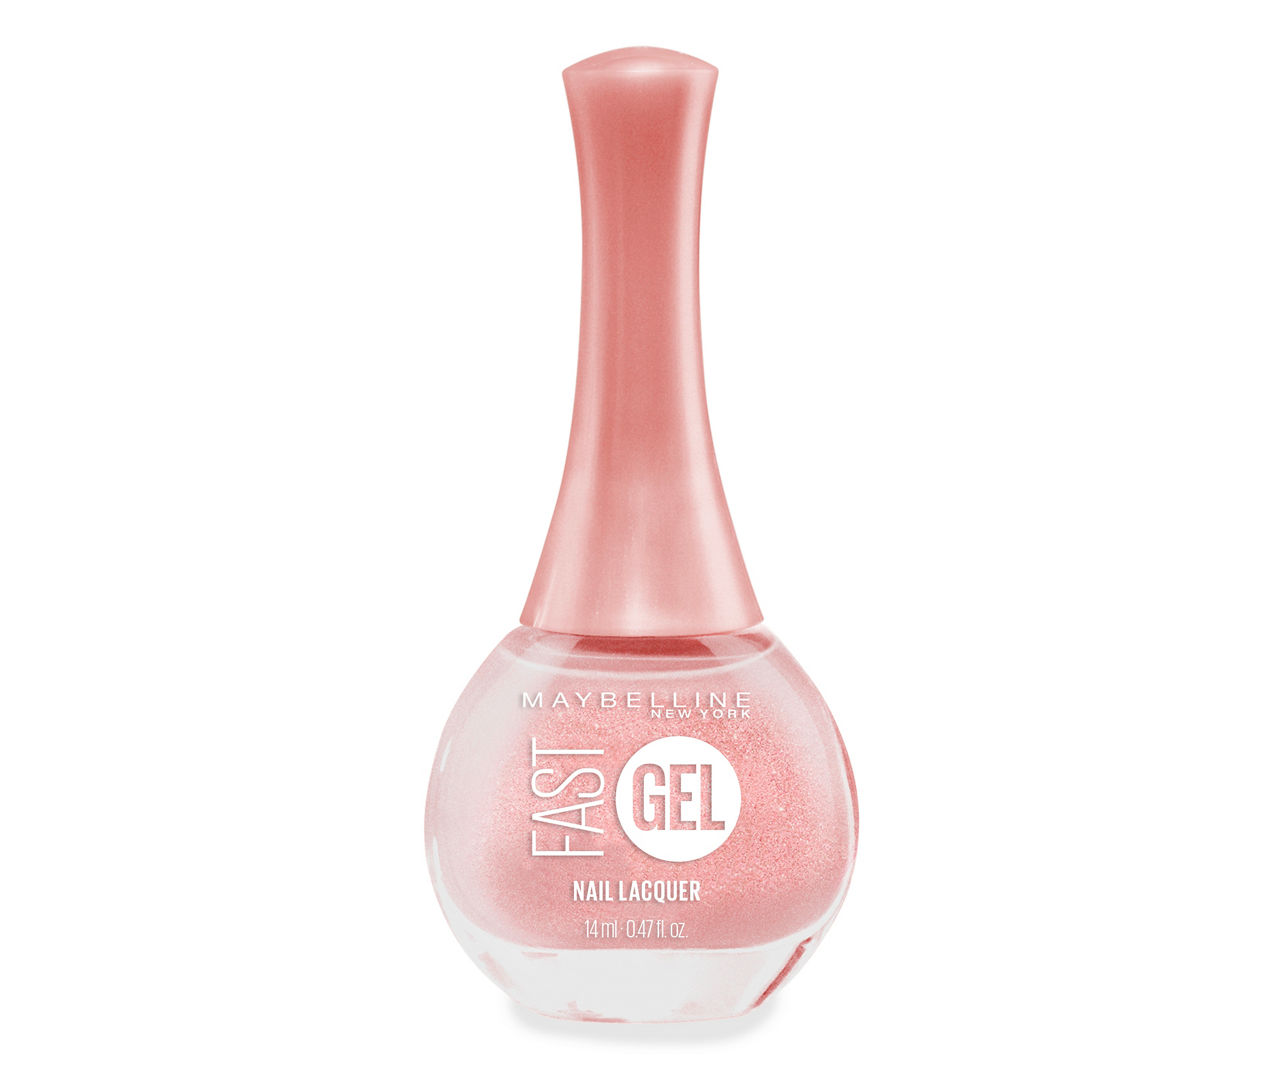 Gel Lots Flush Maybelline Oz. Nail | 0.47 Big Nude Lacquer,